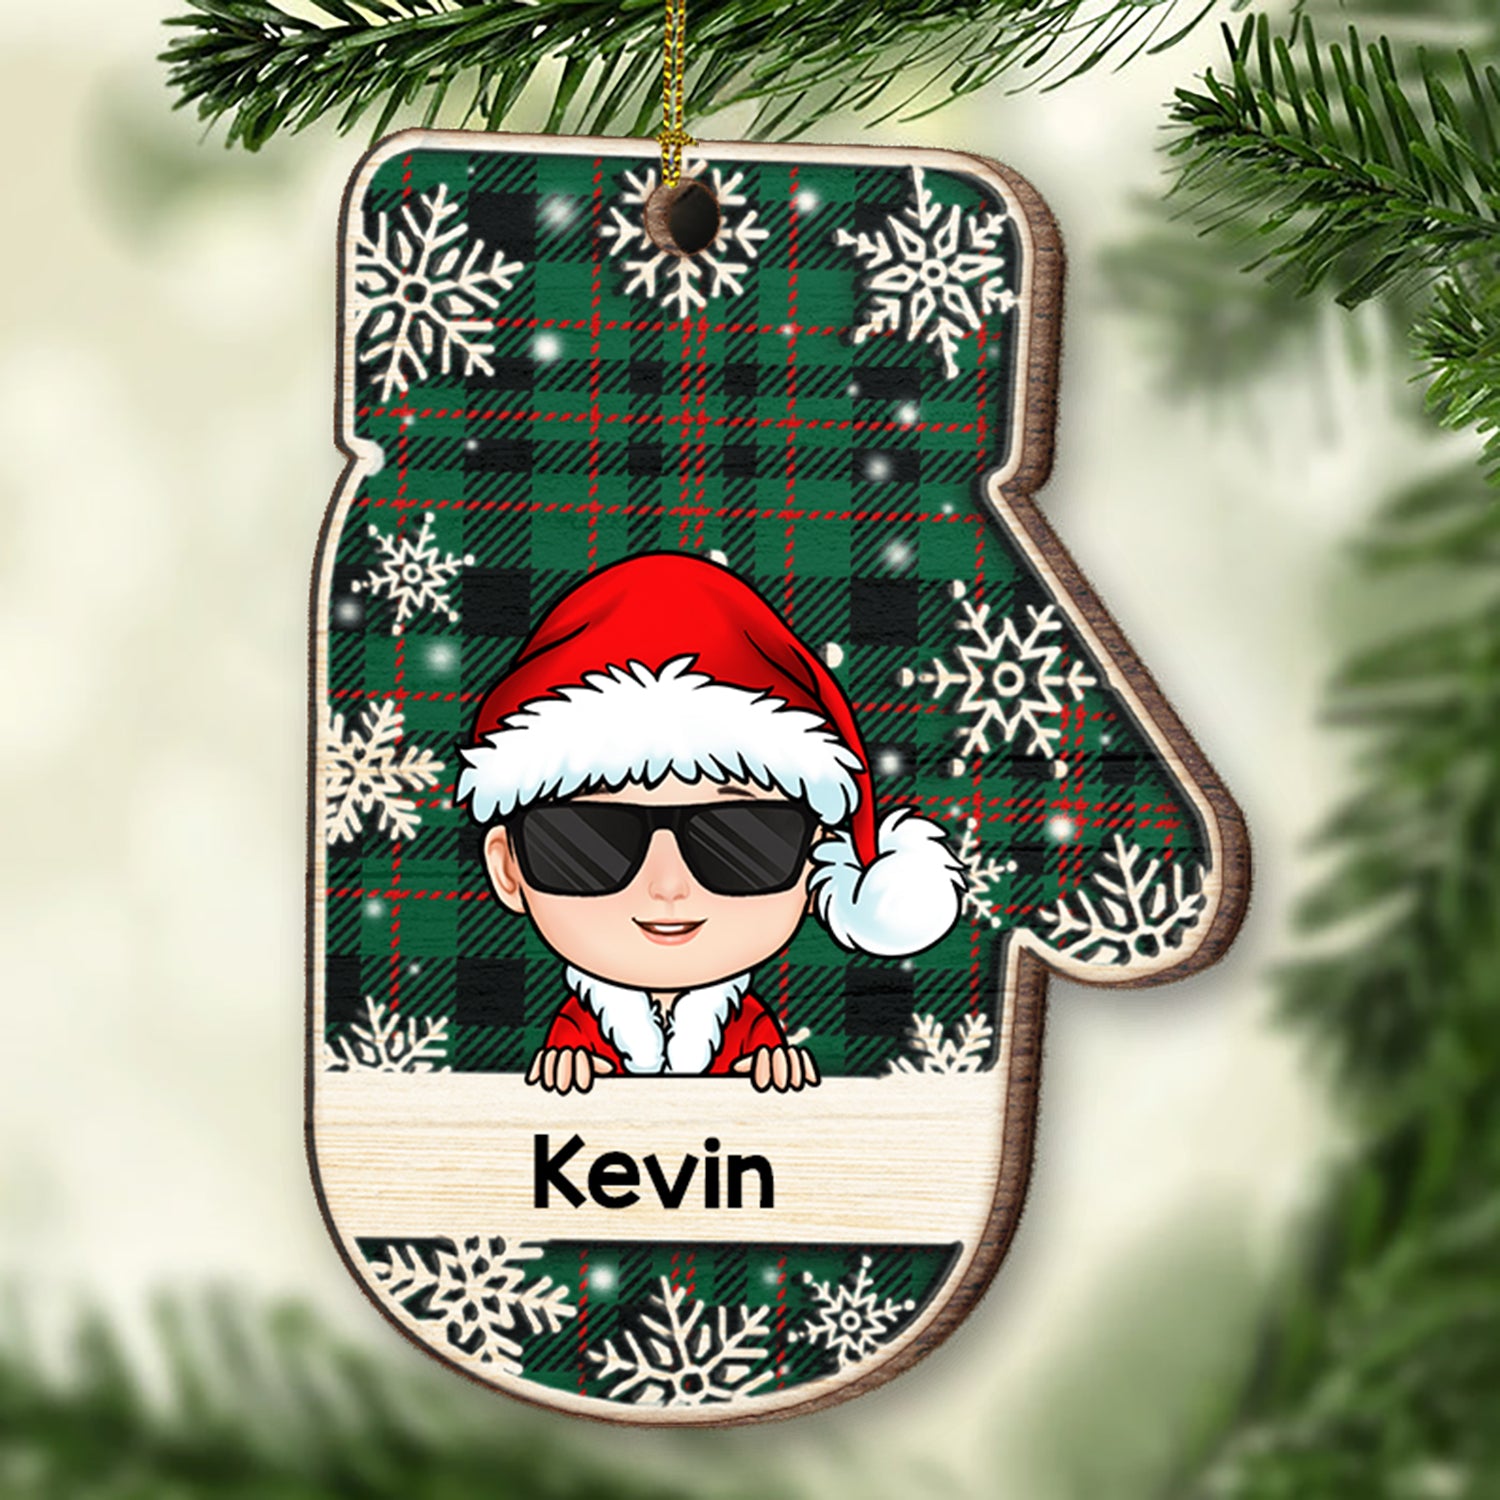 Merry Christmas To The Coolest Kid - Personalized Shape Ornament - Christmas Gift For Family